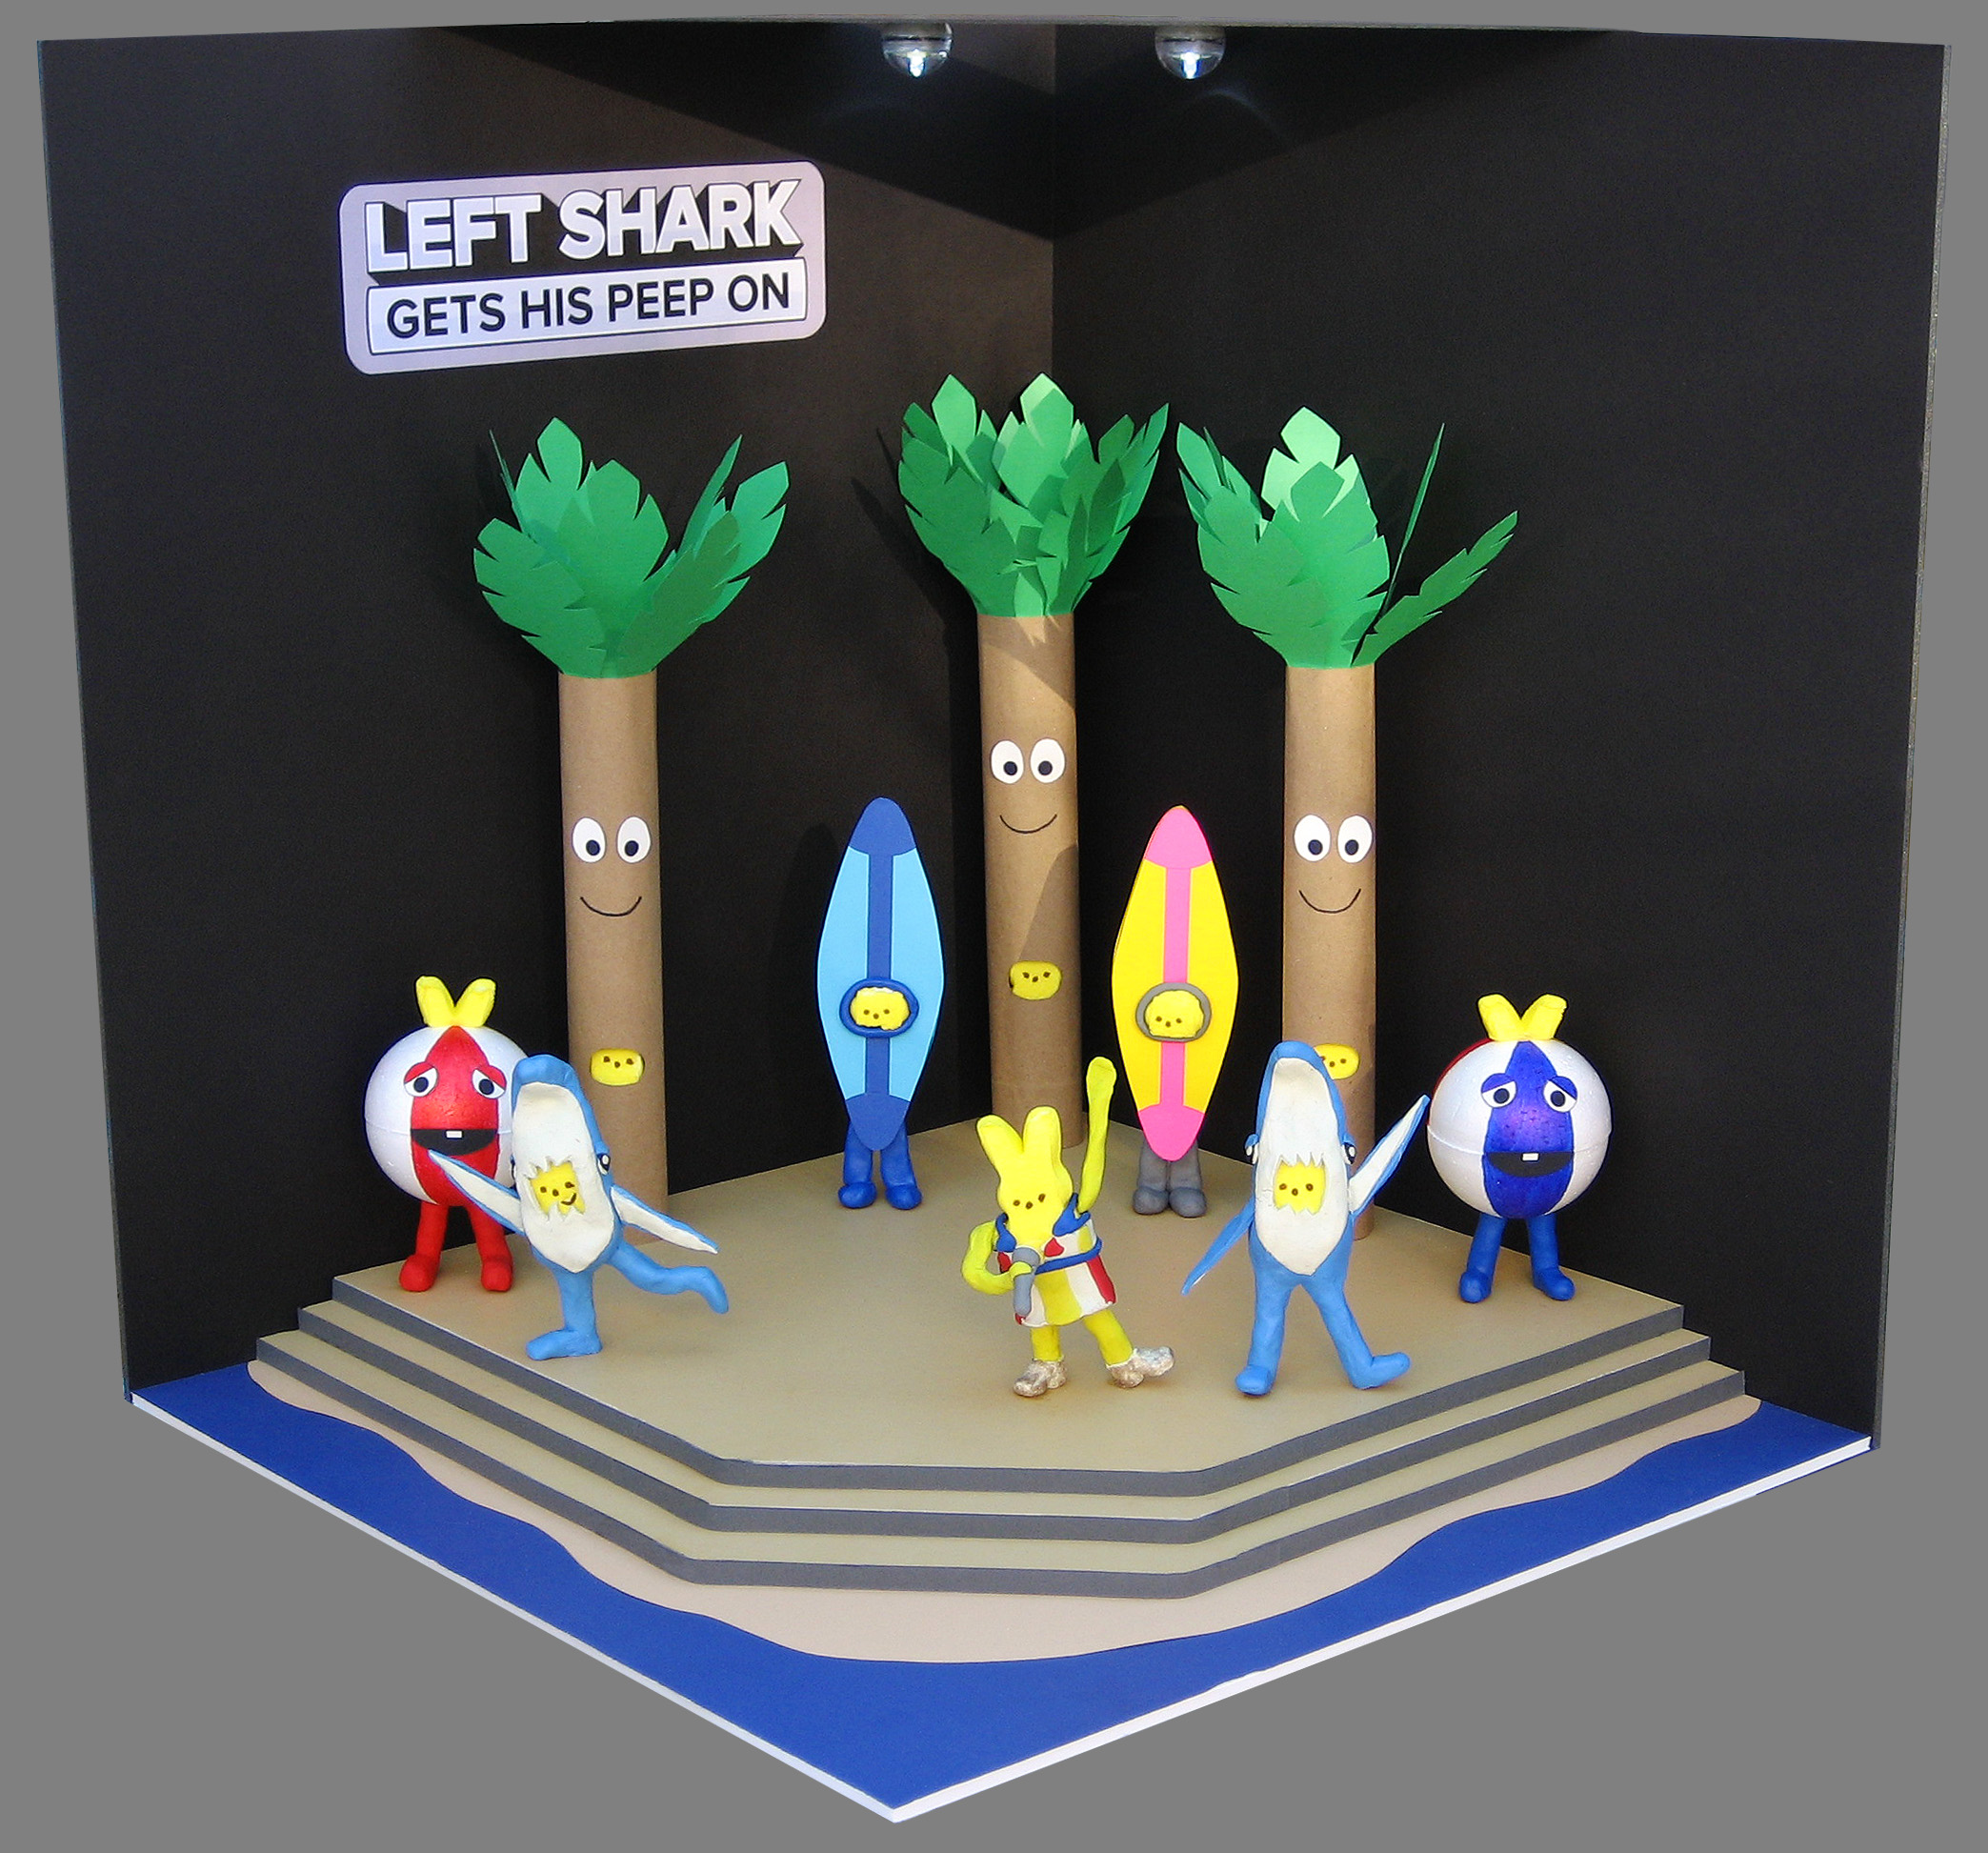 peeps diorama of Superbowl Halftime show with Katy Perry and left shark